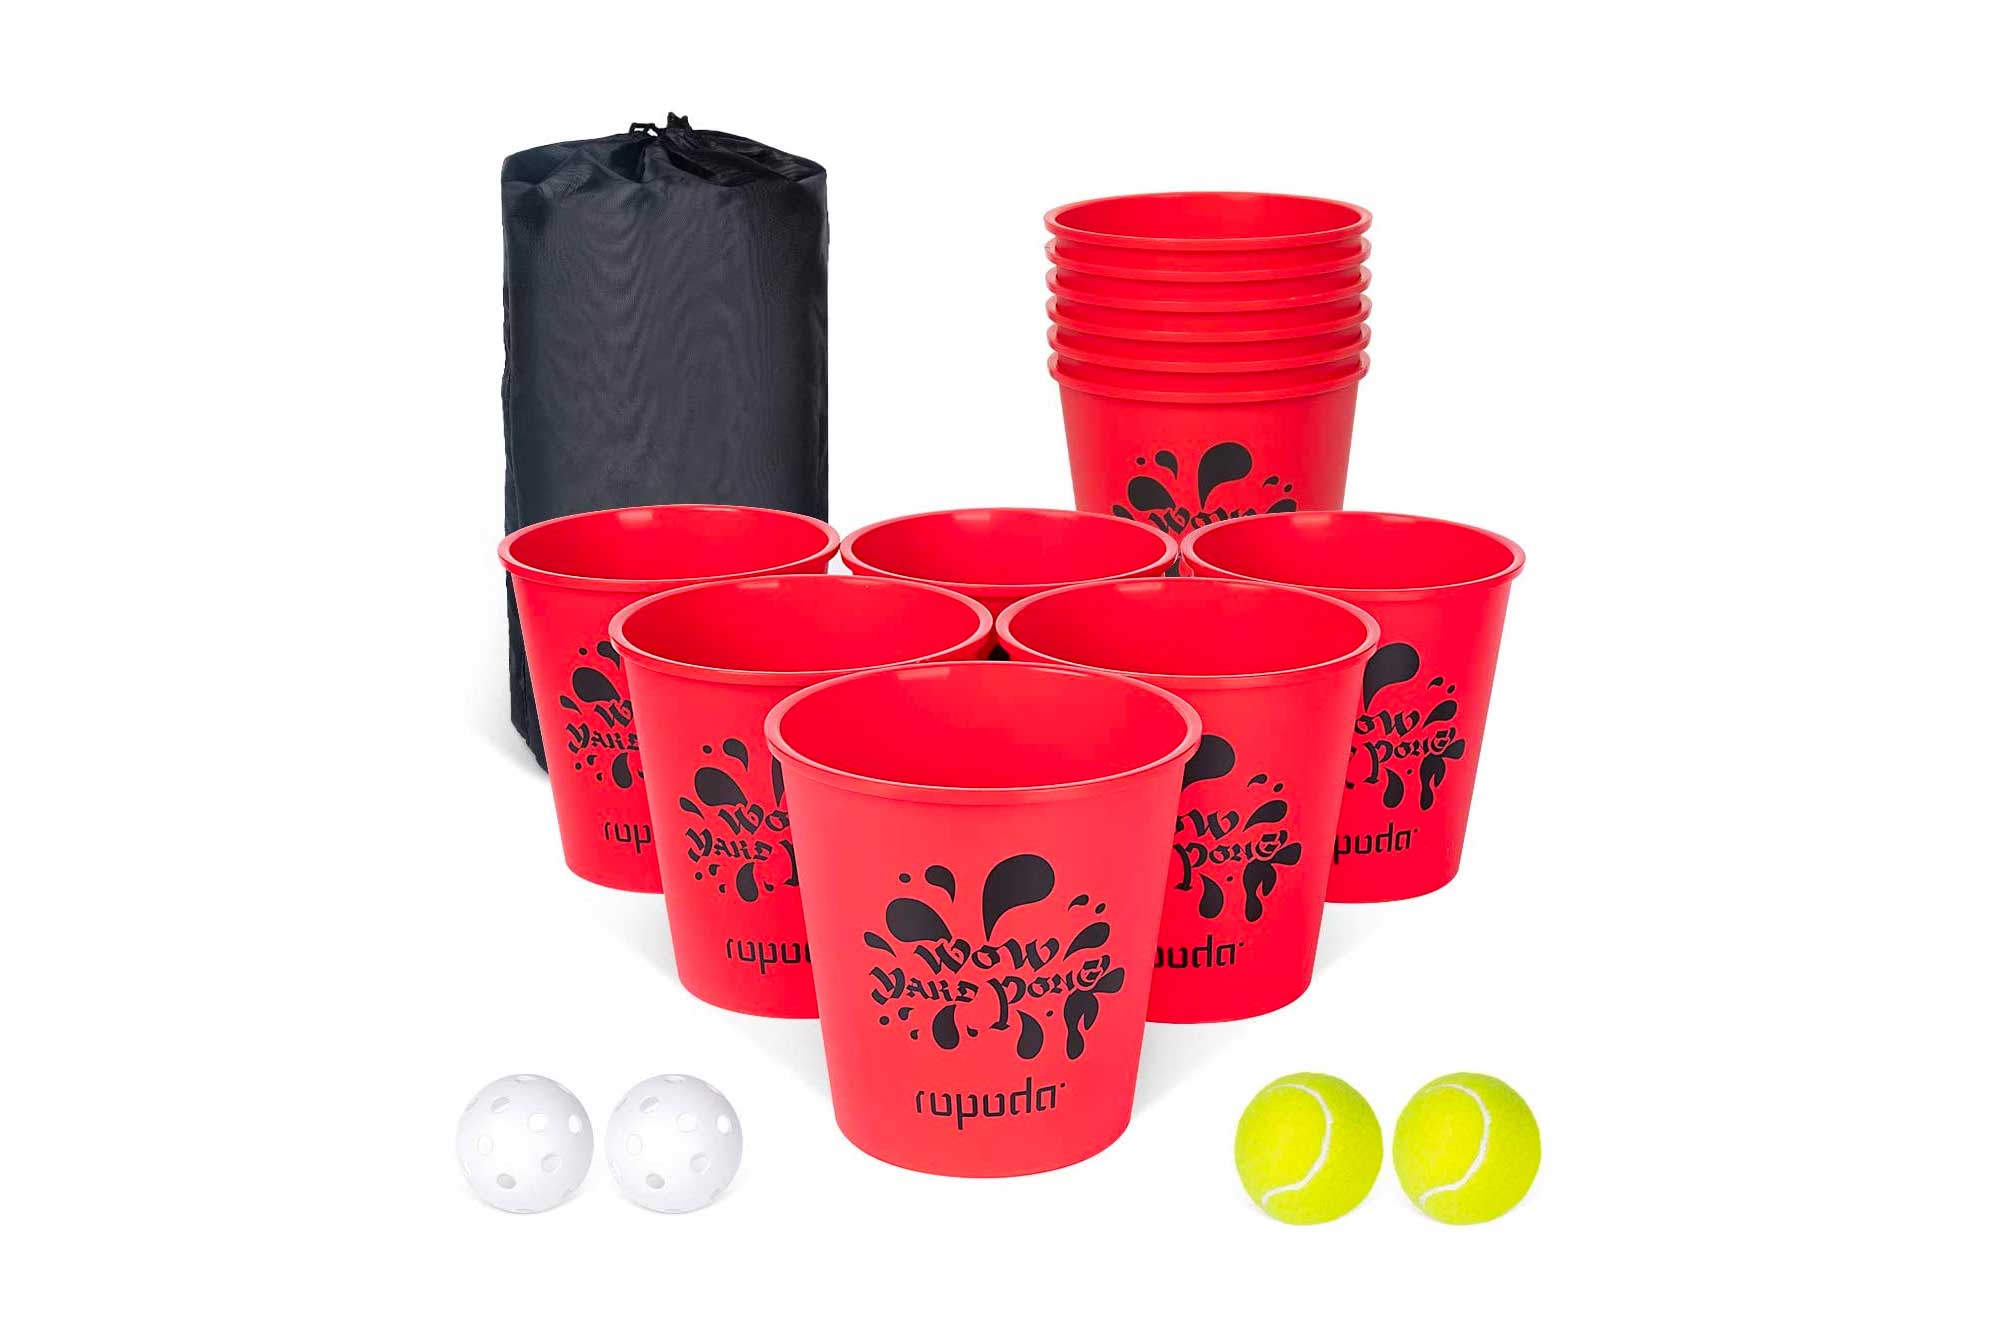 ROPODA Yard Pong - Giant Pong Game Set Outdoor for The Beach, Camping, Lawn and Backyard